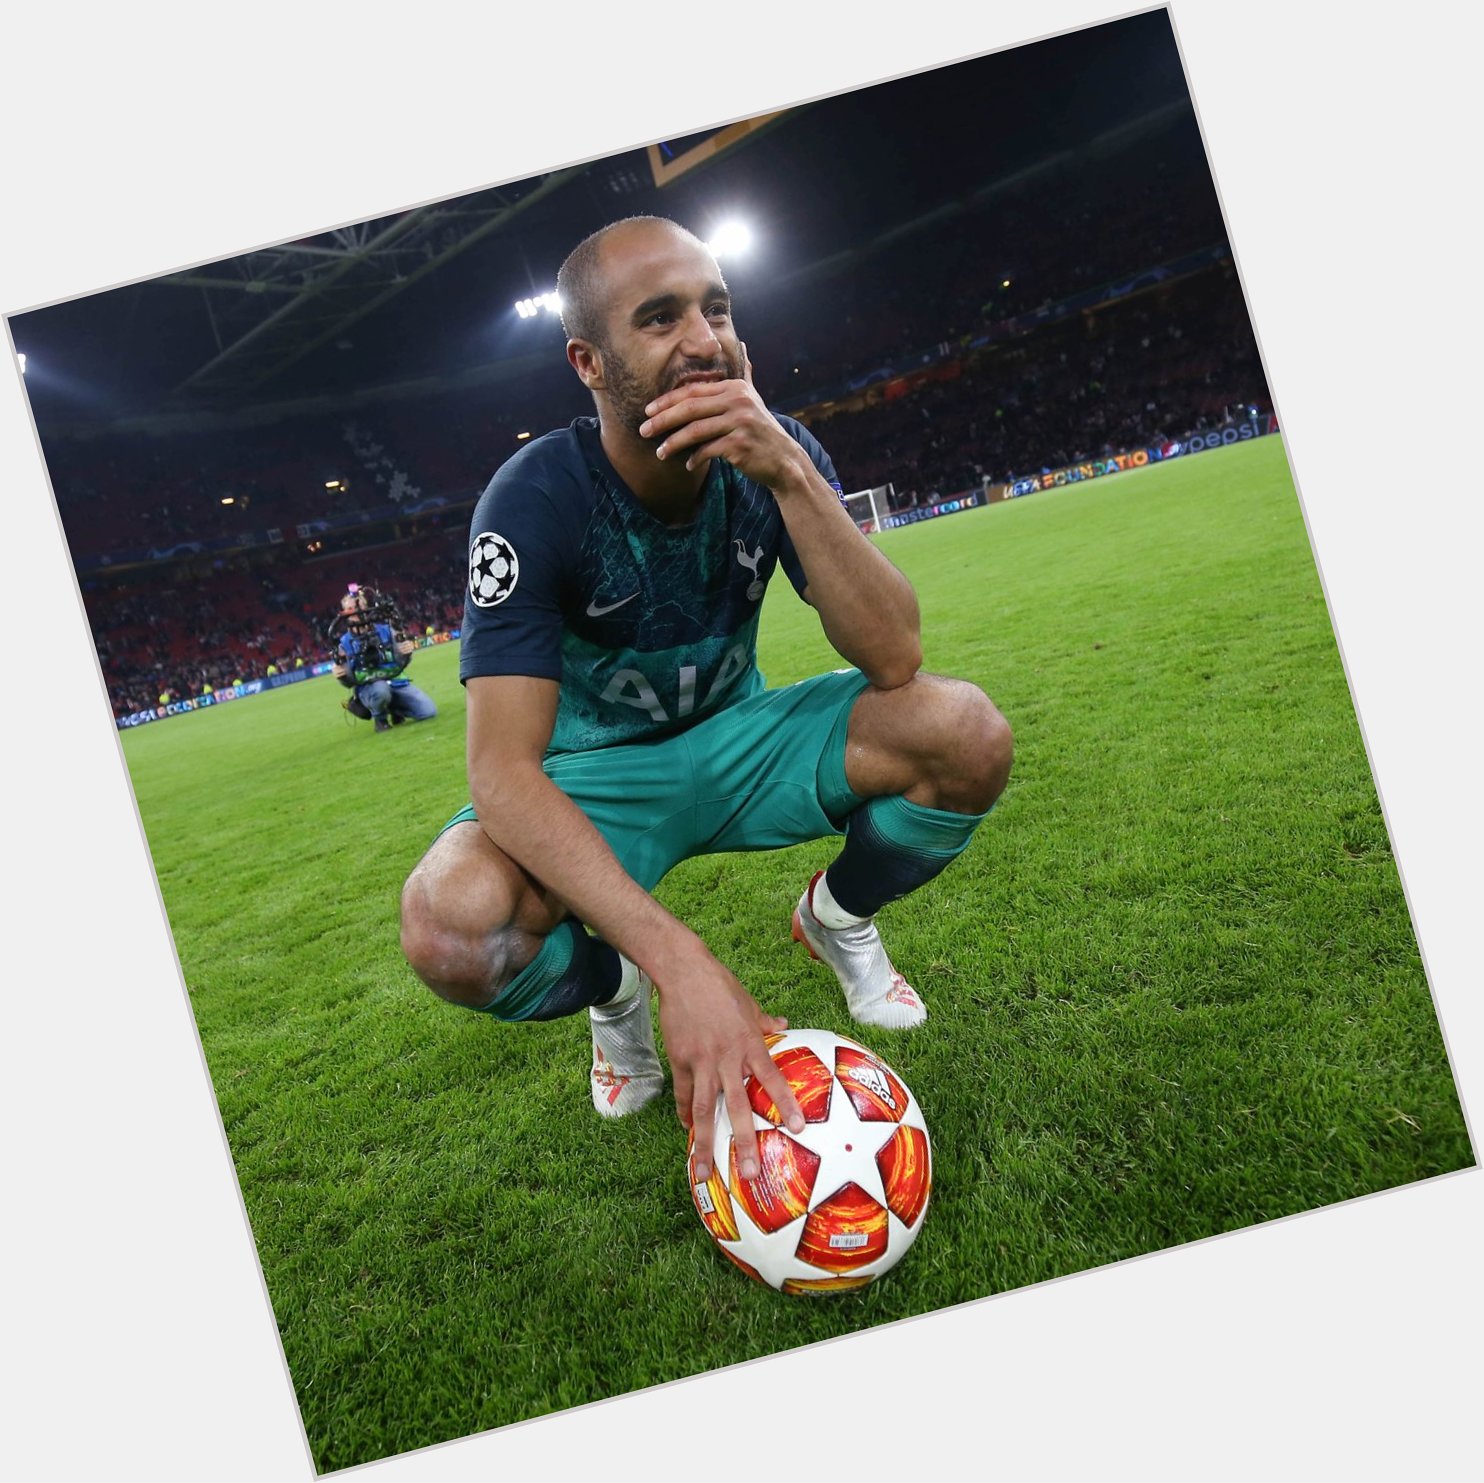 Happy 27th birthday to Lucas Moura. A hat-trick to get Spurs into the Champions League Final. Wow. 